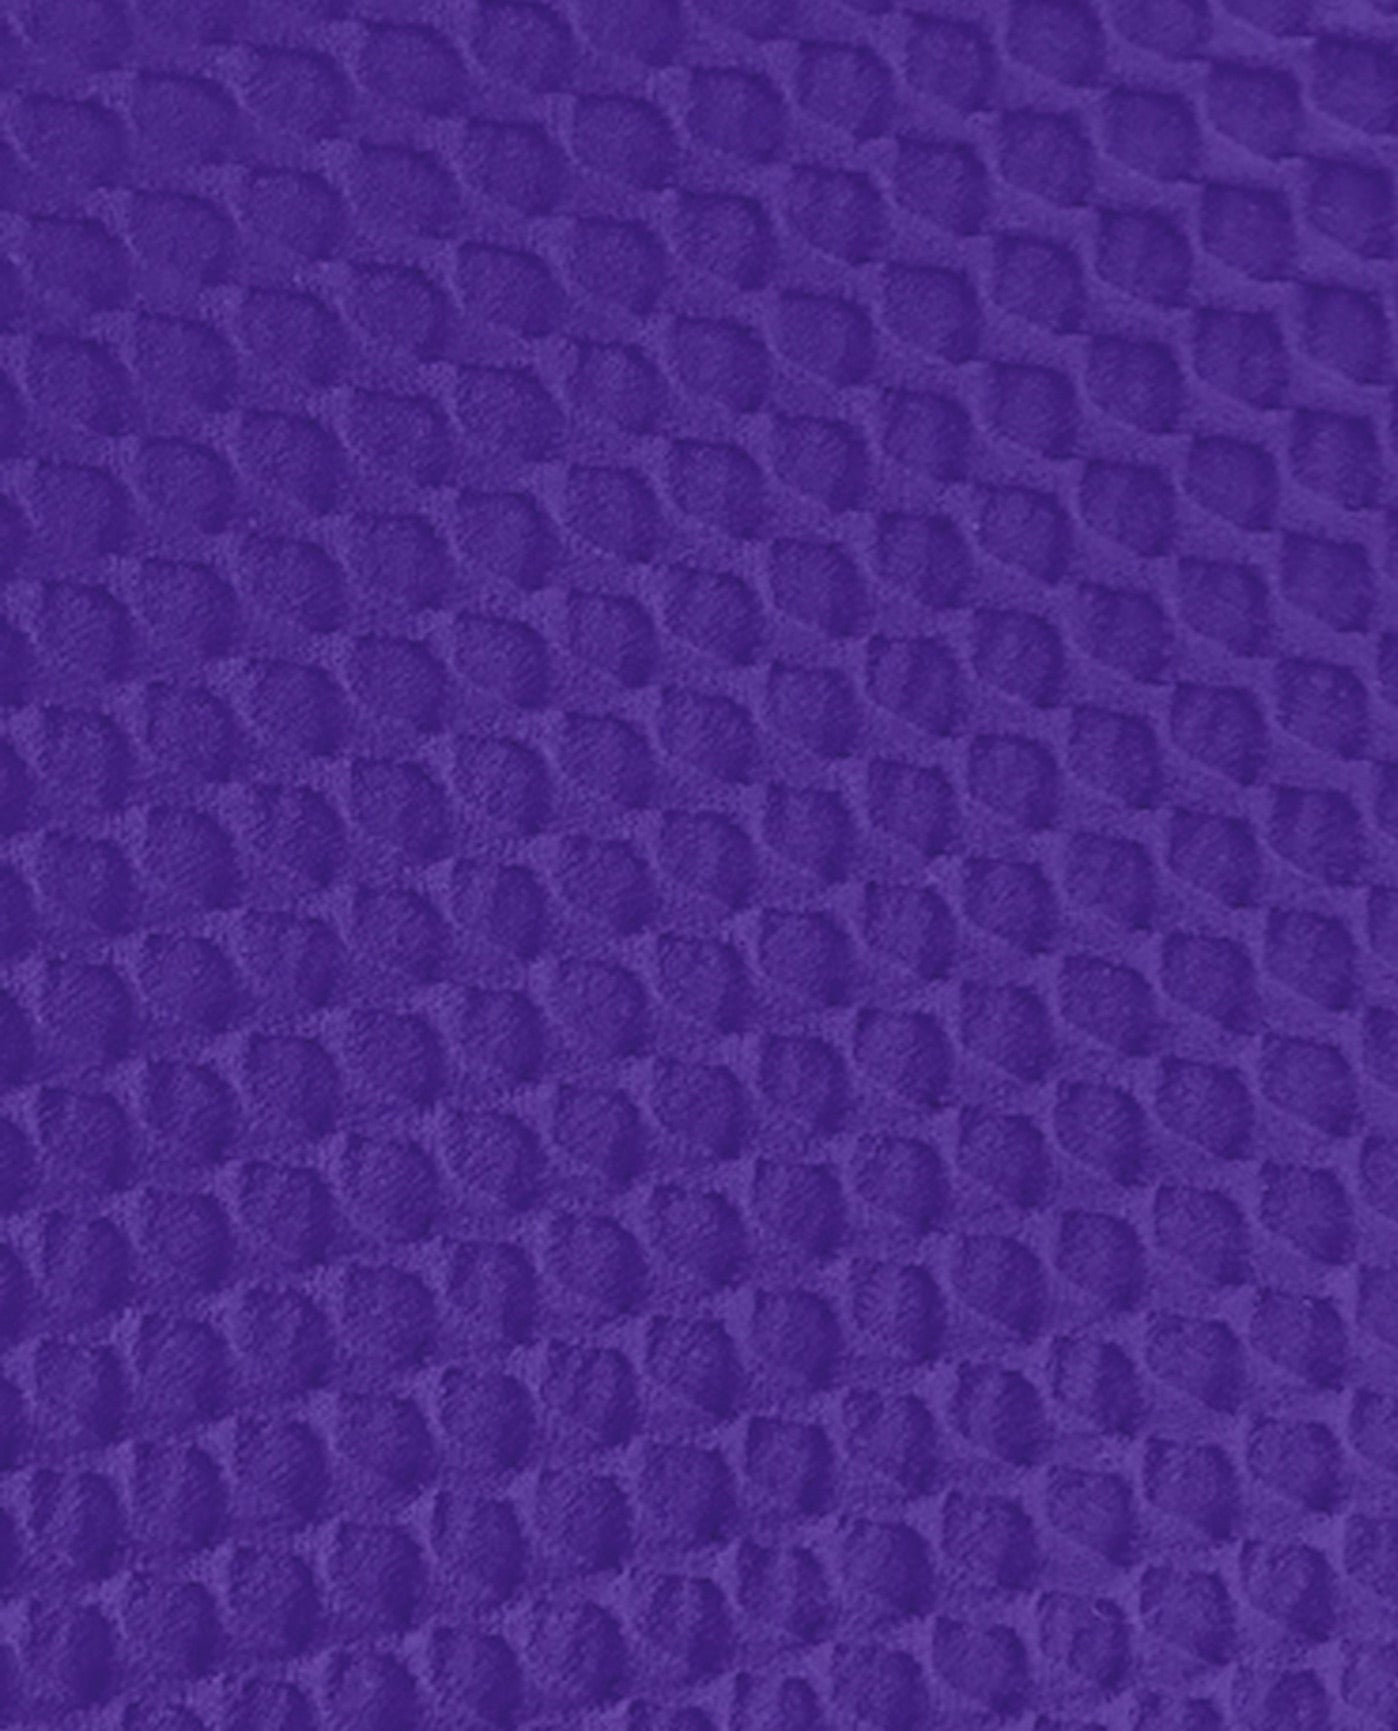 FABRIC SWATCH VIEW OF CHLORINE RESISTANT AQUAMORE SOLID TEXTURED HIGH NECK PLUS SIZE SWIMSUIT | 510 AQT TEXTURED PURPLE